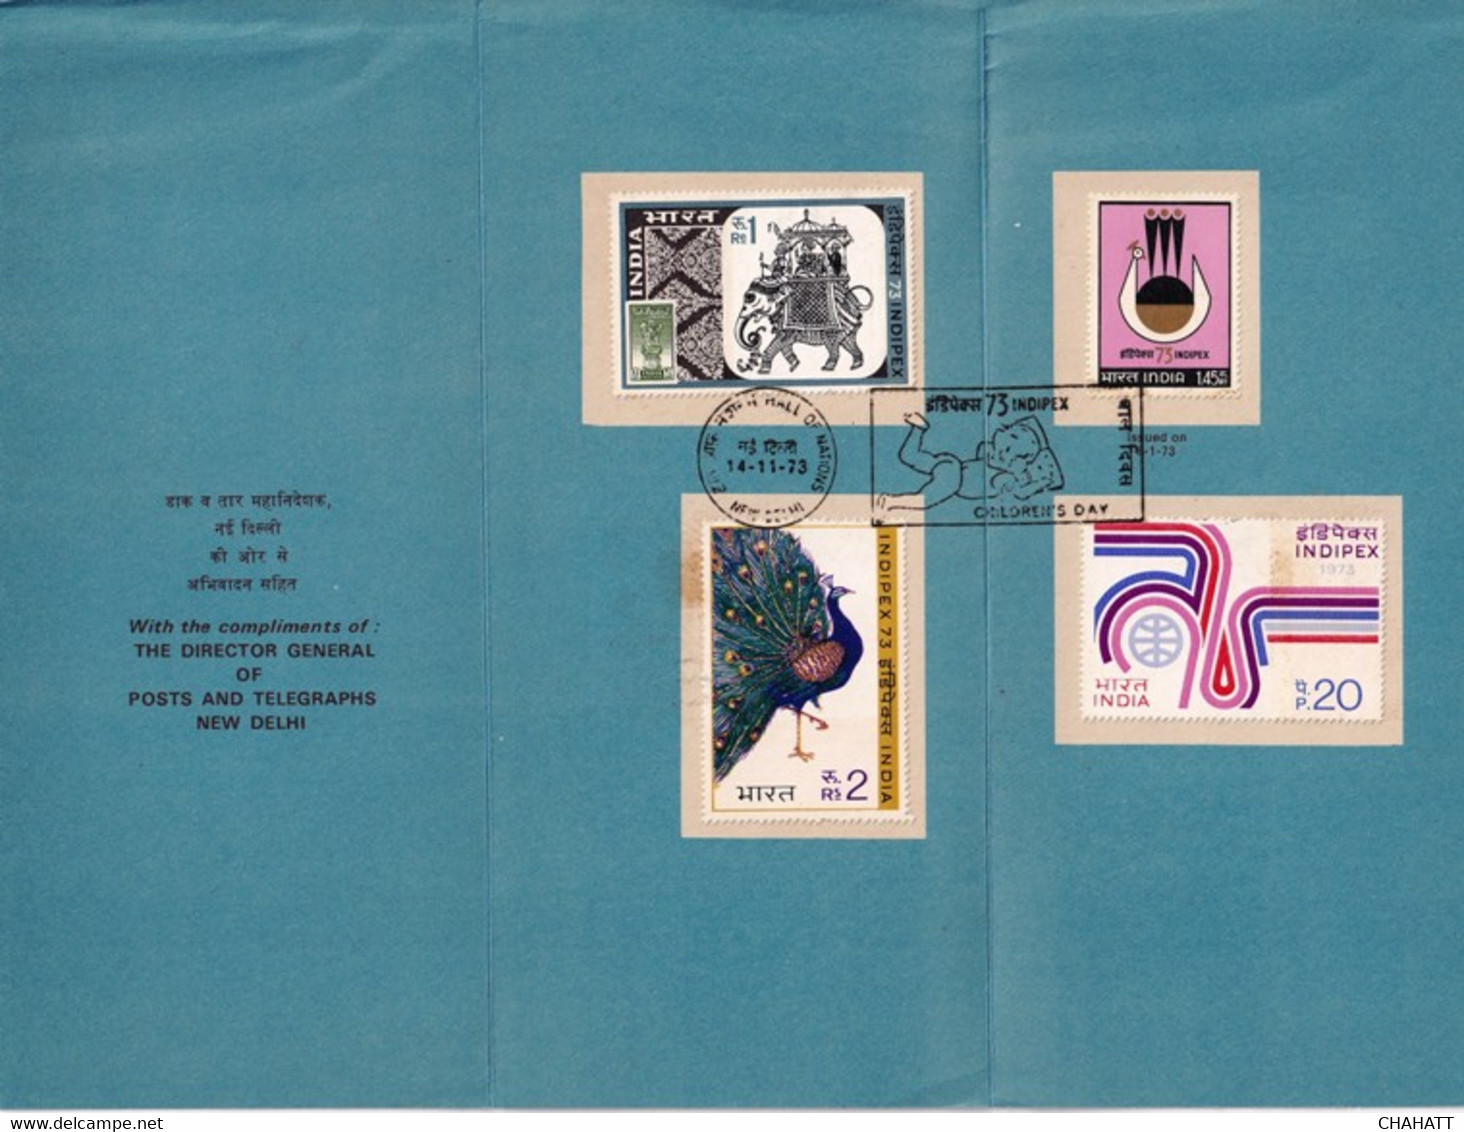 INDIPEX - 73 - PEACOCK AND OTHERS - FIRST DAY CANCEL- INFORMATION BROCHURE-SCARCE-BX2-38 - Colecciones & Series